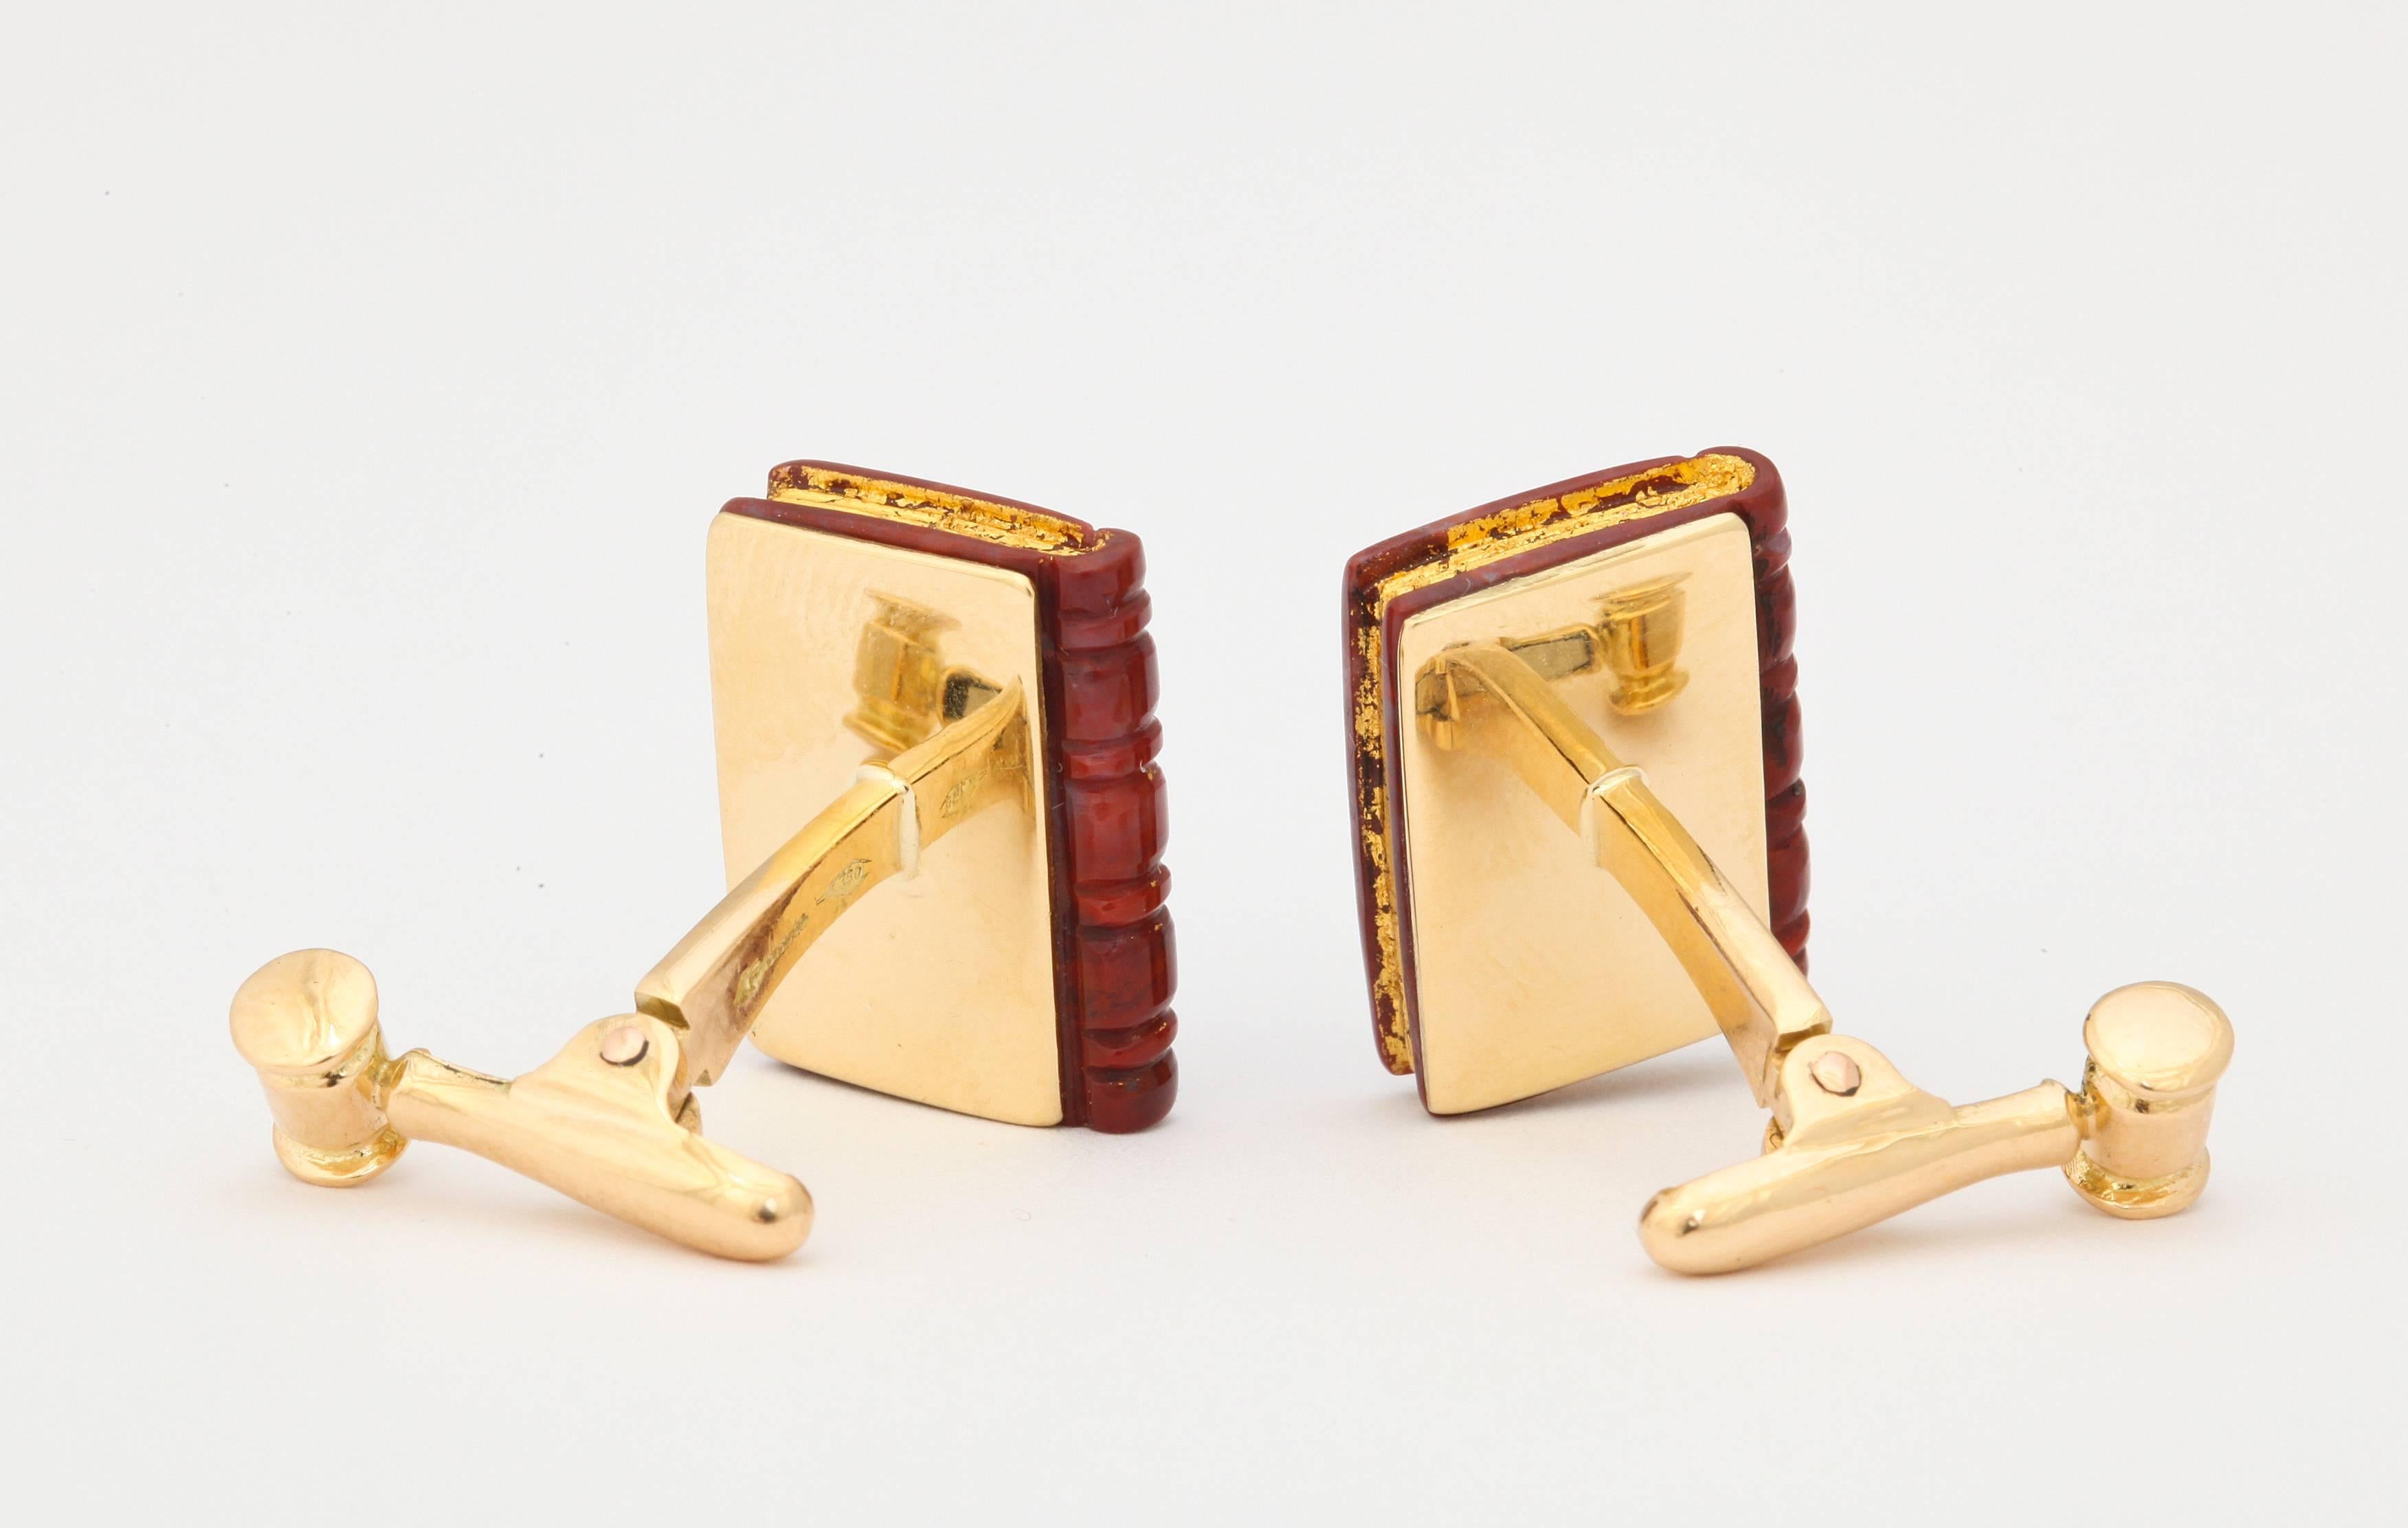  Michael Kanners  Carved Stone Legal Book Cufflinks 2